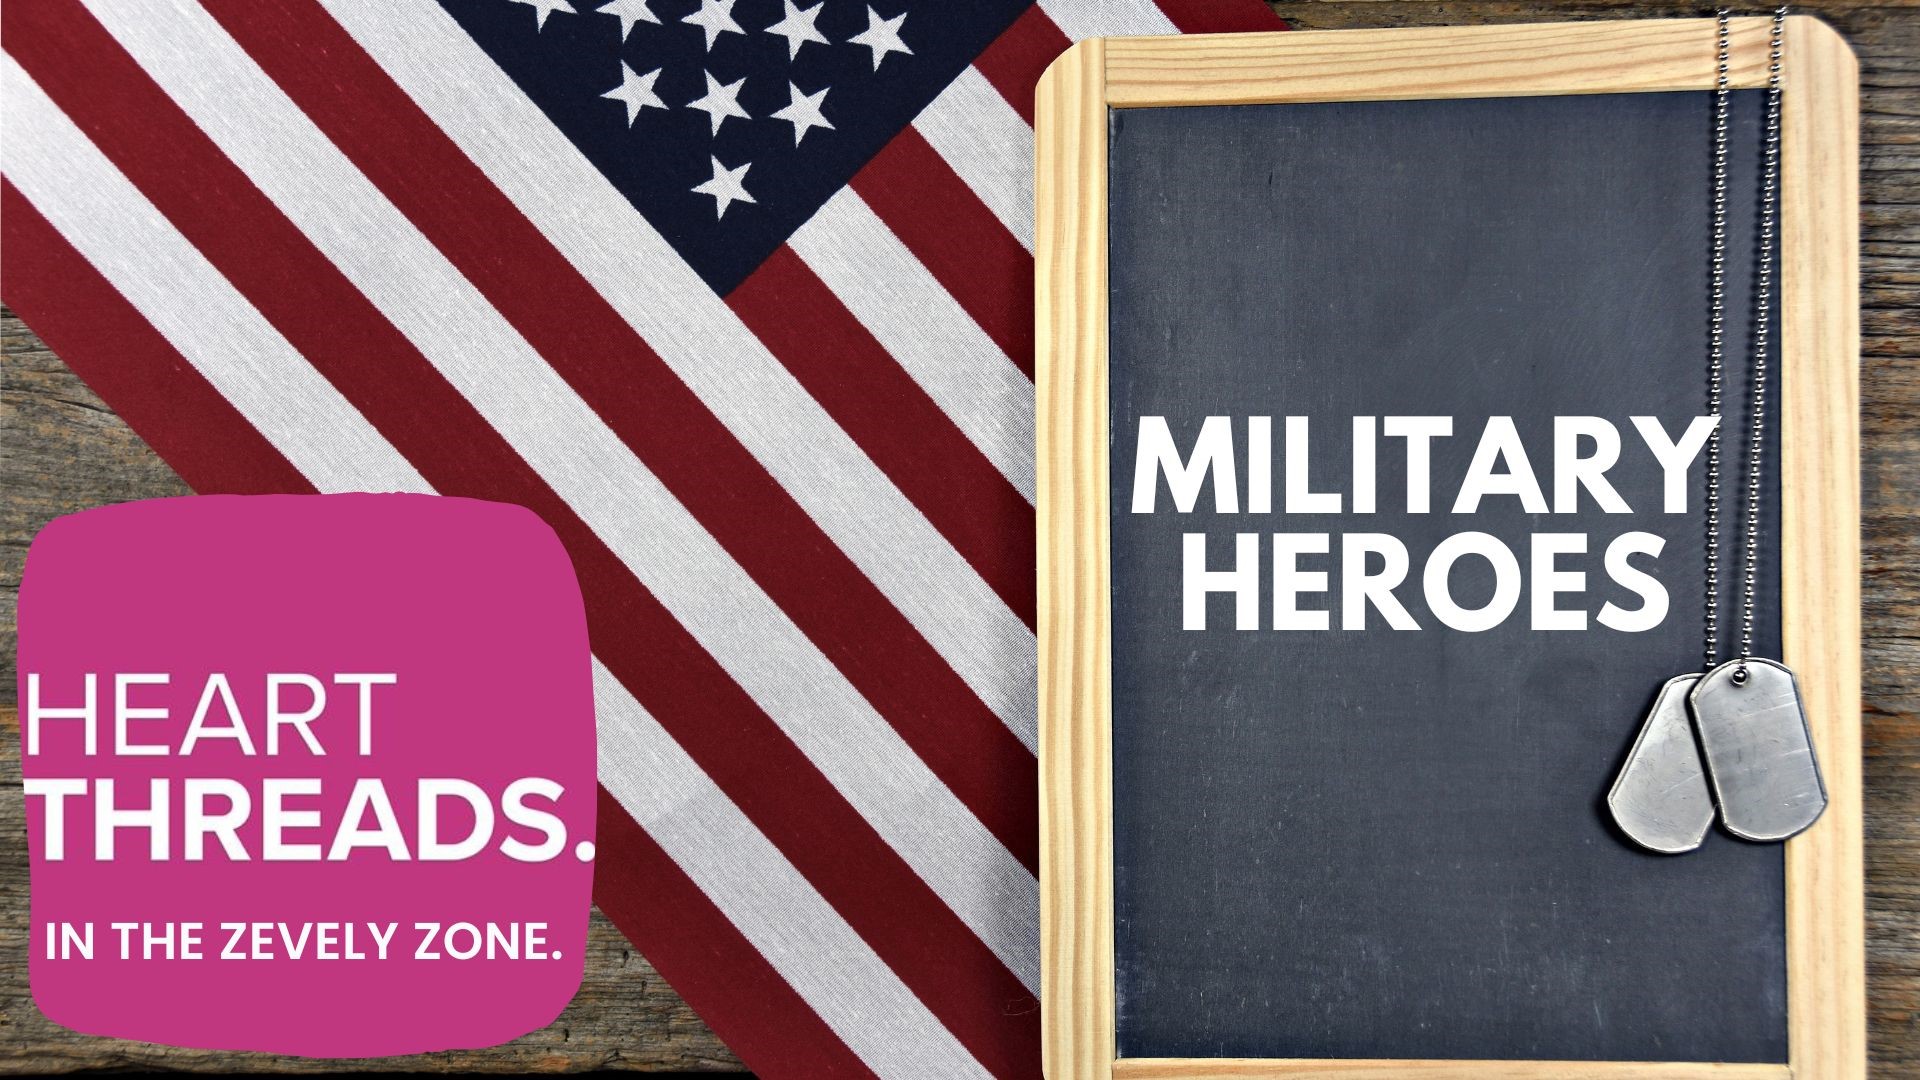 A collection of heartwarming stories surrounding military veterans, including reunions, memorials and more. KFMB's Jeff Zevely introduces us to some military heroes.